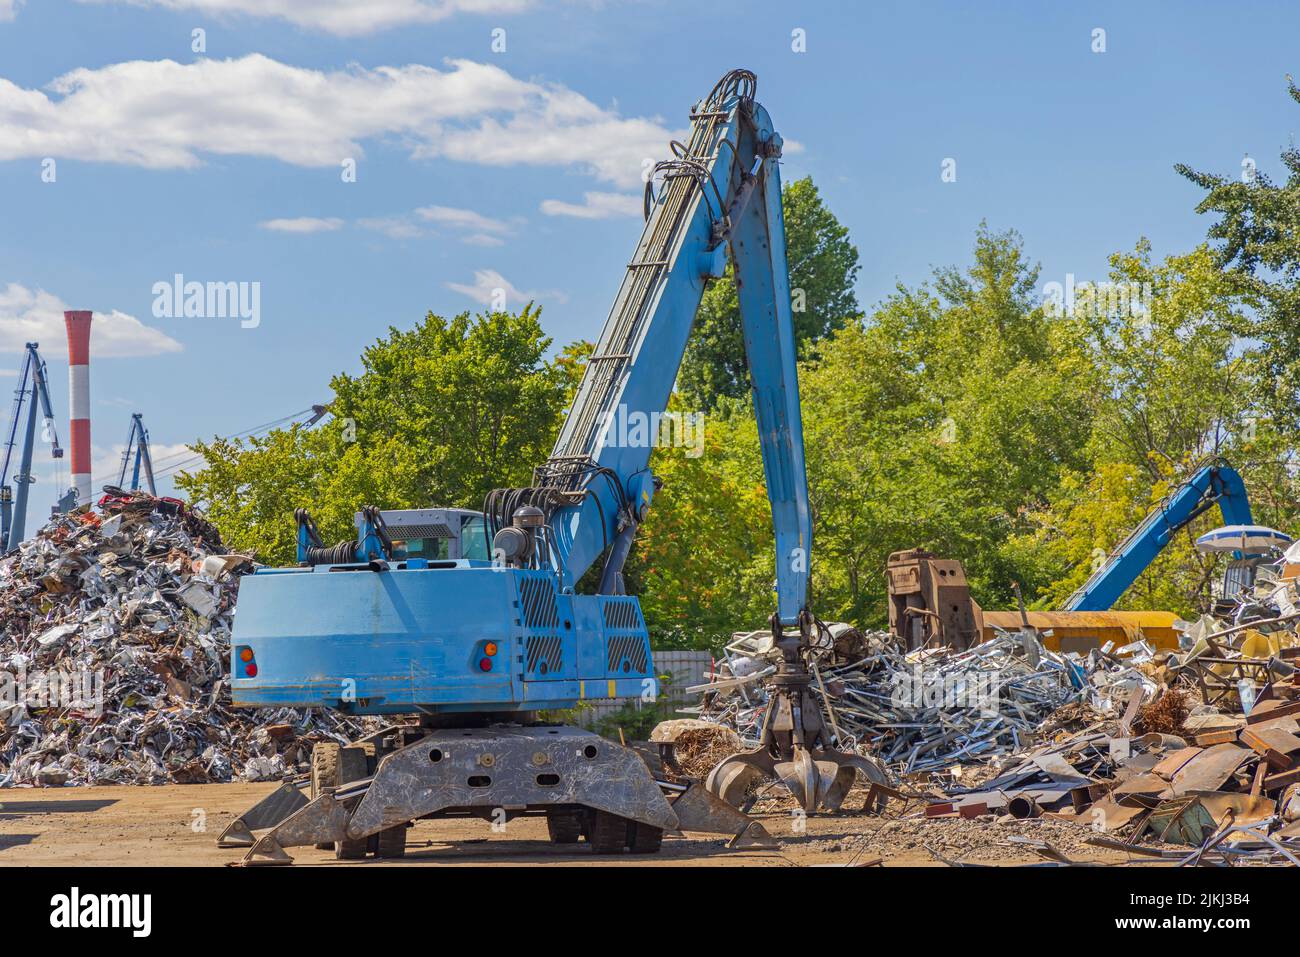 Machine With Peel Grapple at Scrapyard Recycling Facility Stock Photo